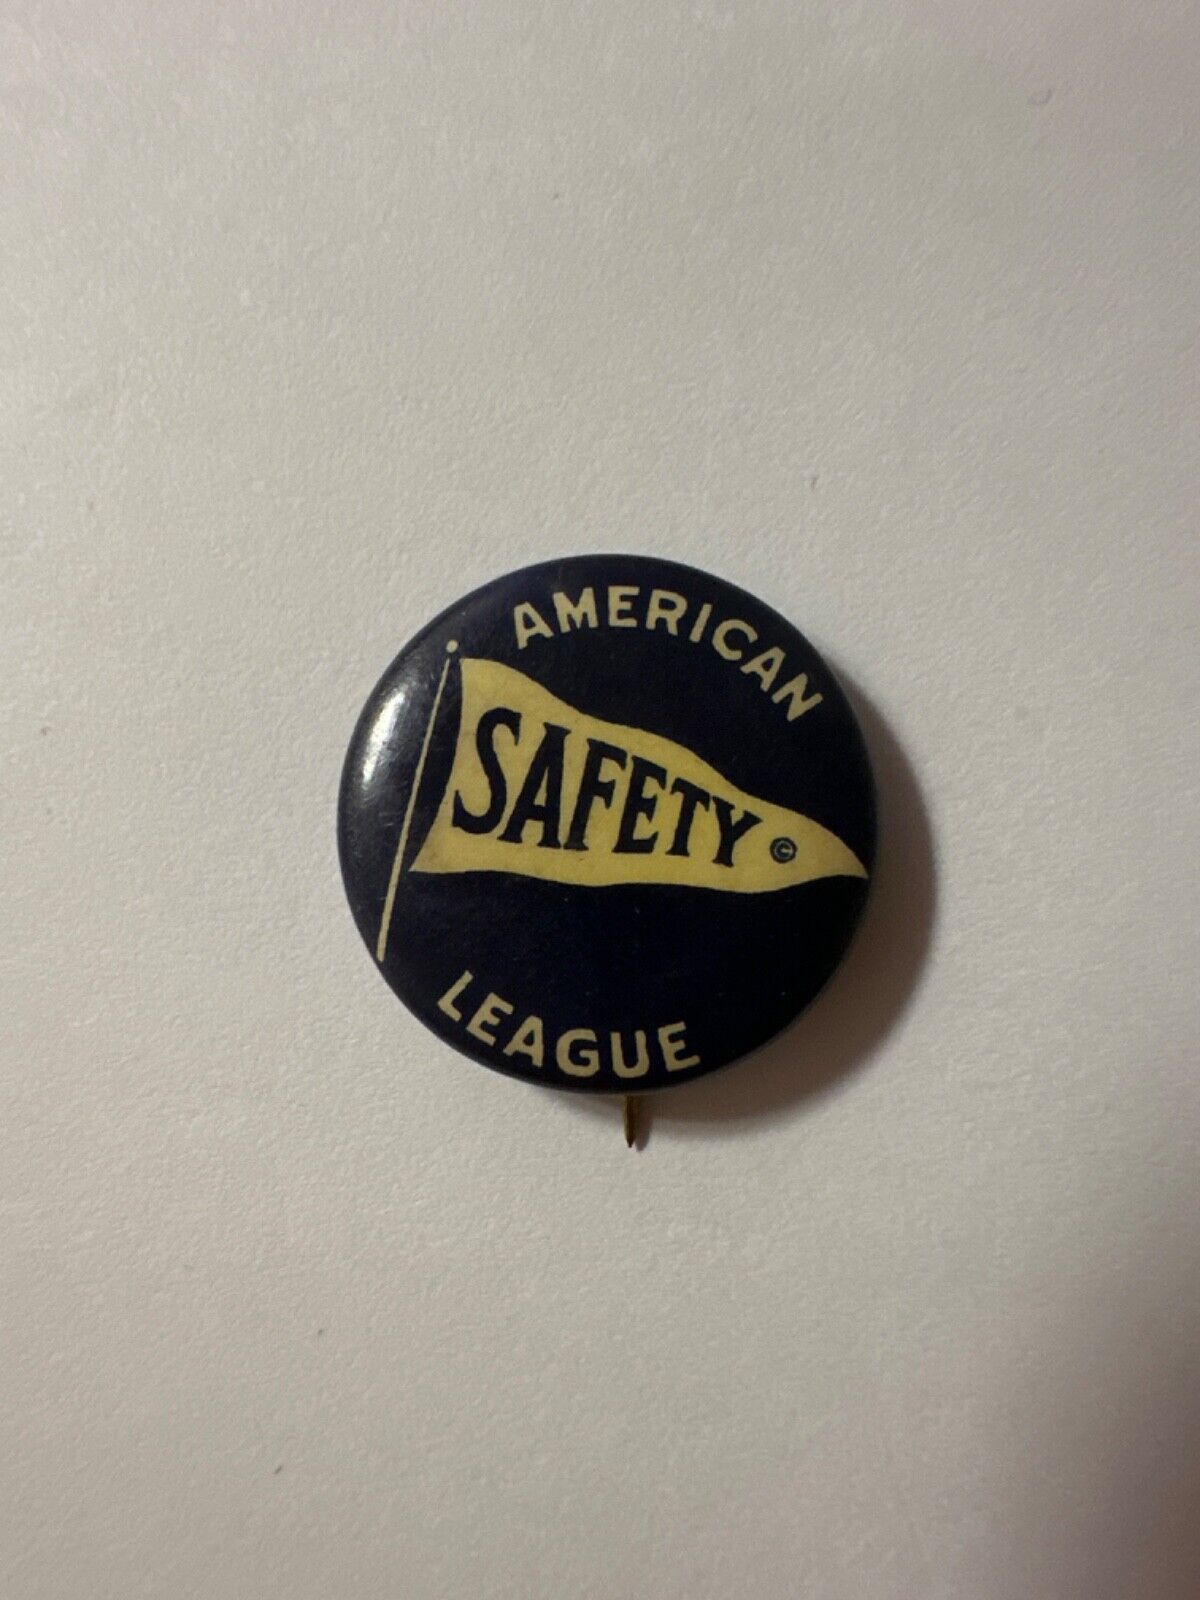 AMERICAN SAFETY LEAGUE FLAG CELLULOID PINBACK, early 1900s 7/8\